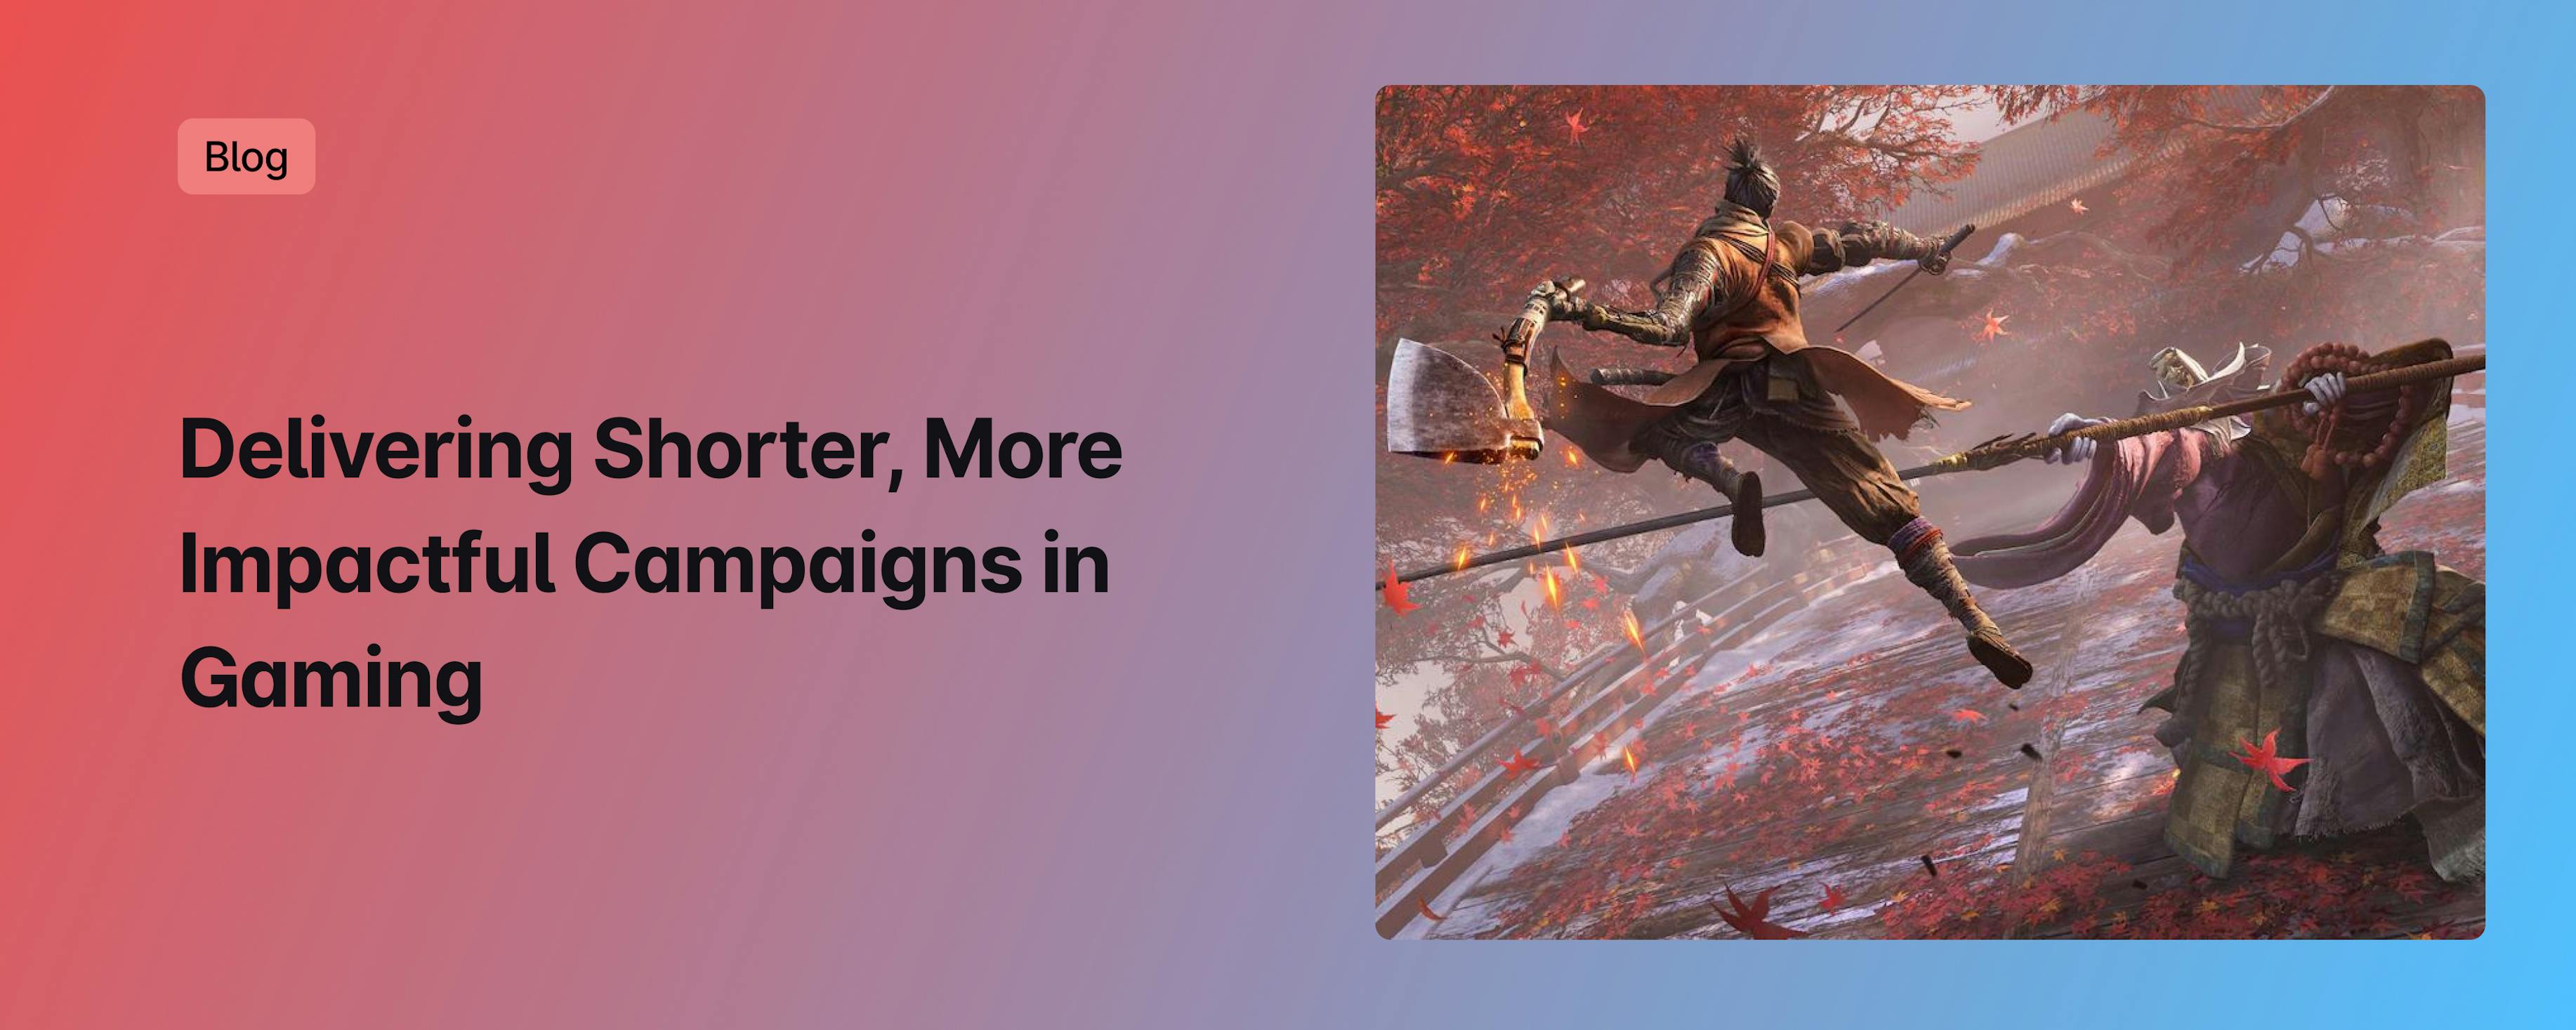 Delivering Shorter, More Impactful Campaigns in Gaming